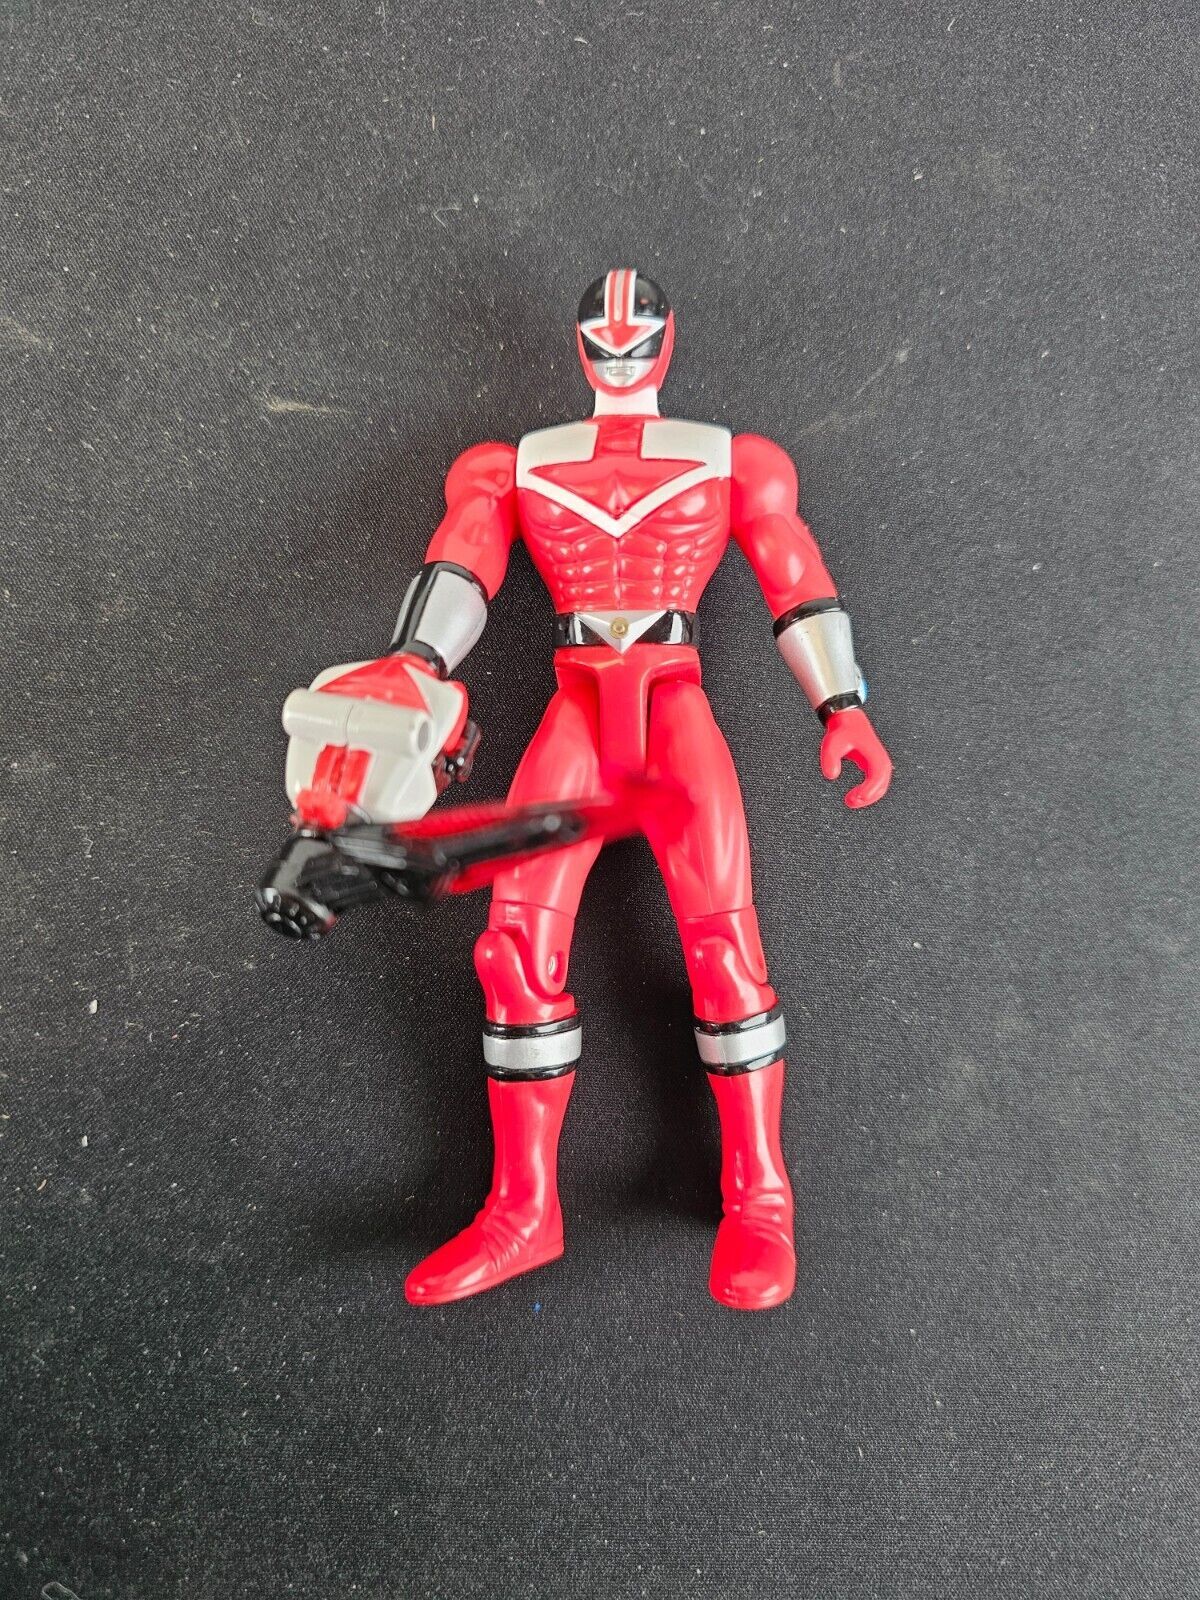 6" Power Rangers Time Force RED TF FIGHTER Action Figure Bandai Vintage 2000 - $4.90